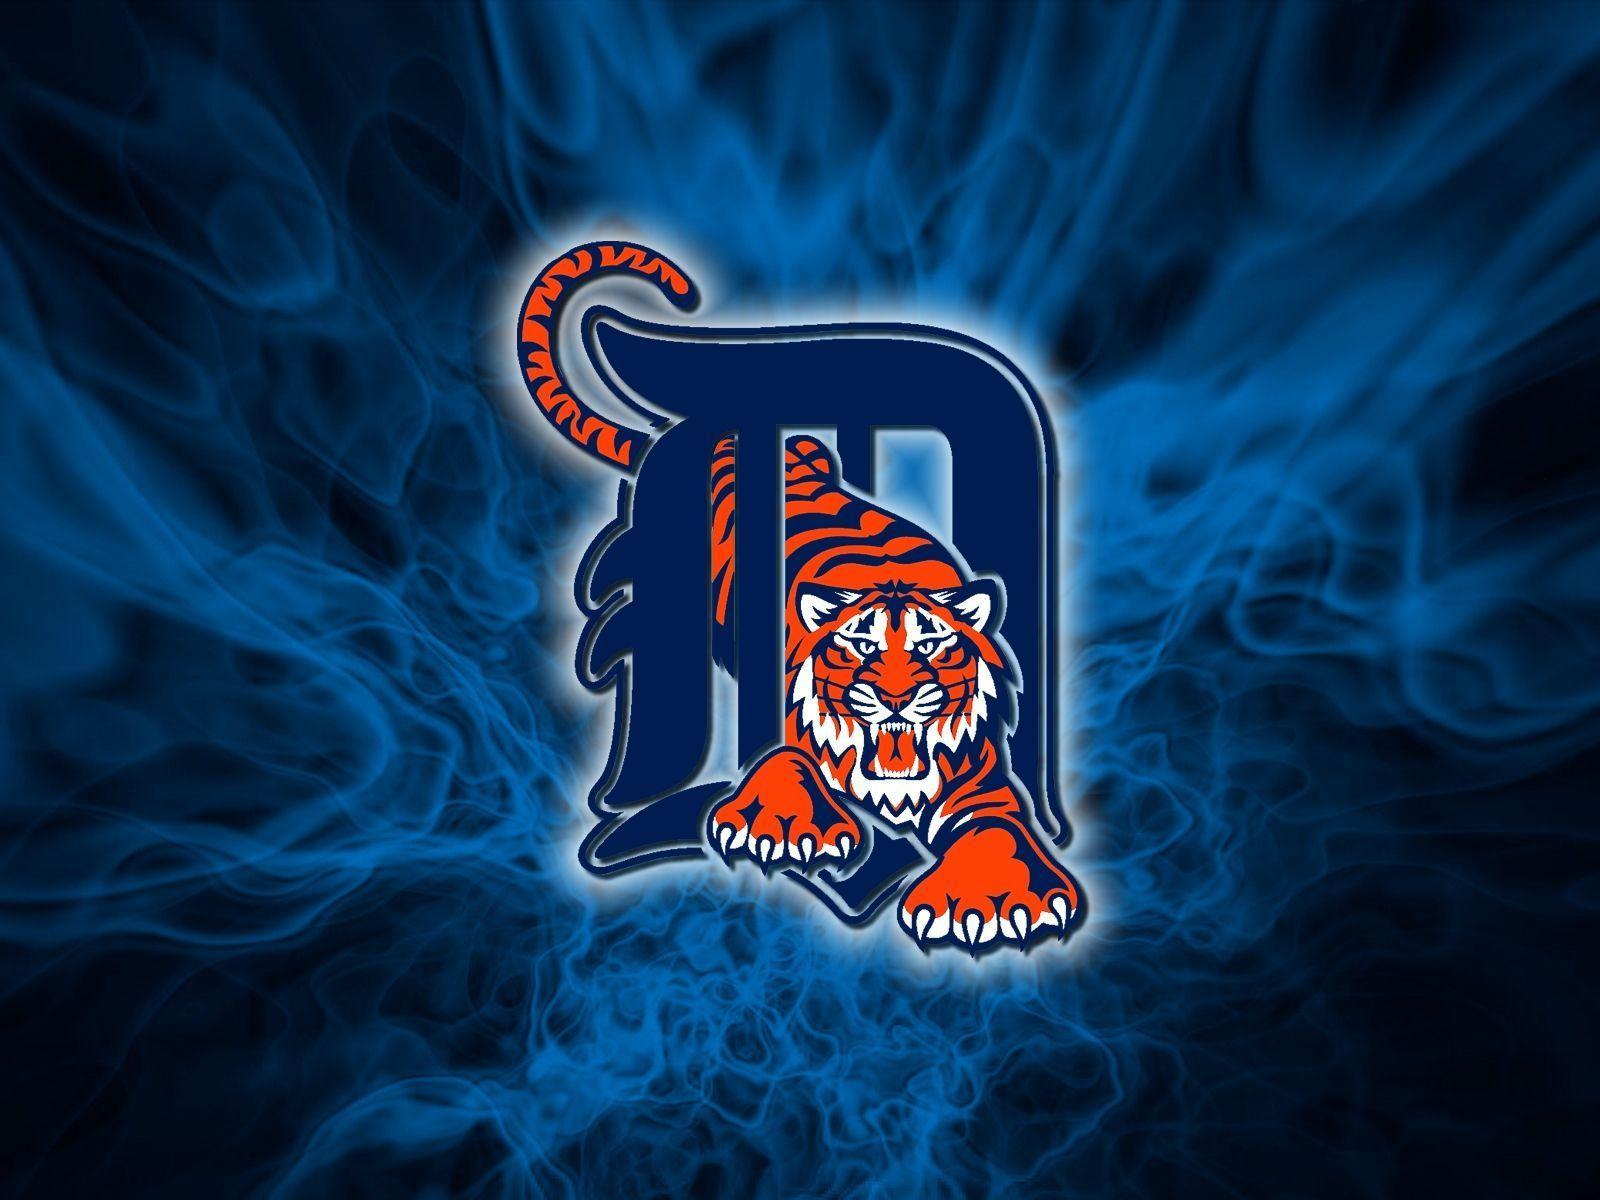 Detroit Tigers  iPhone 5 wallpaper by LicoriceJack on DeviantArt